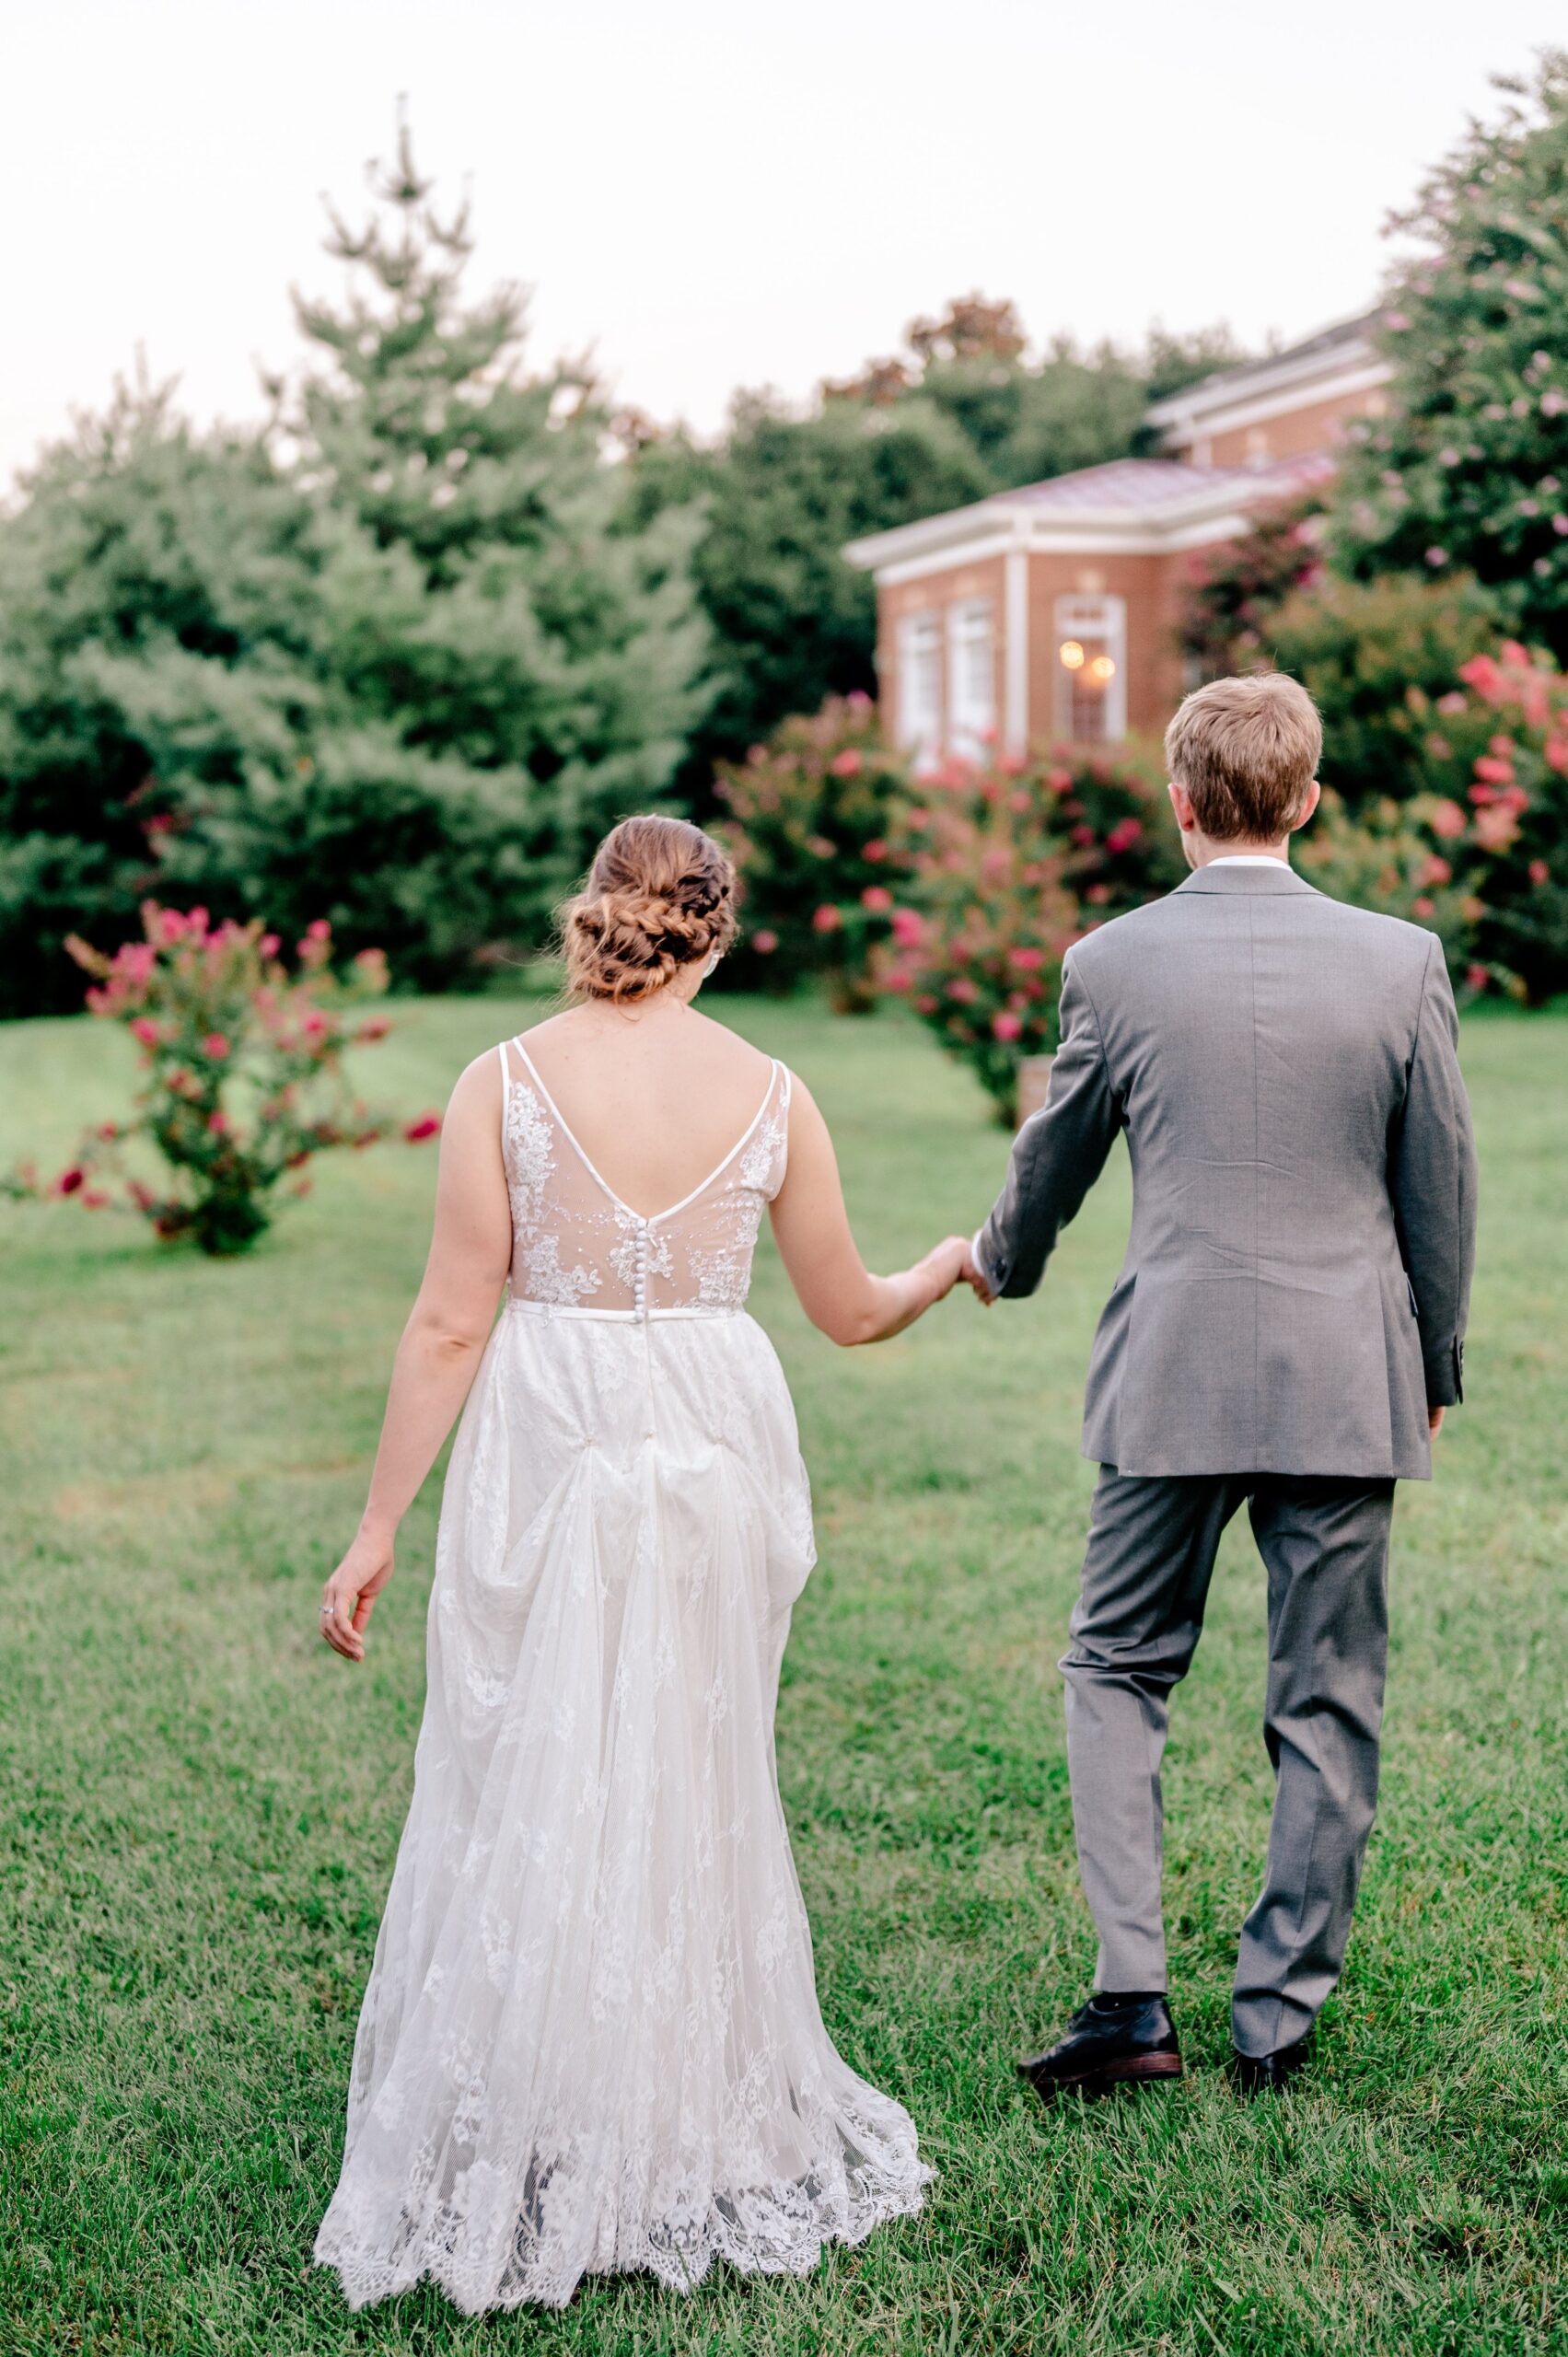 A bride and groom walking together through the gardens at one of the best wedding venues in Northern Virginia